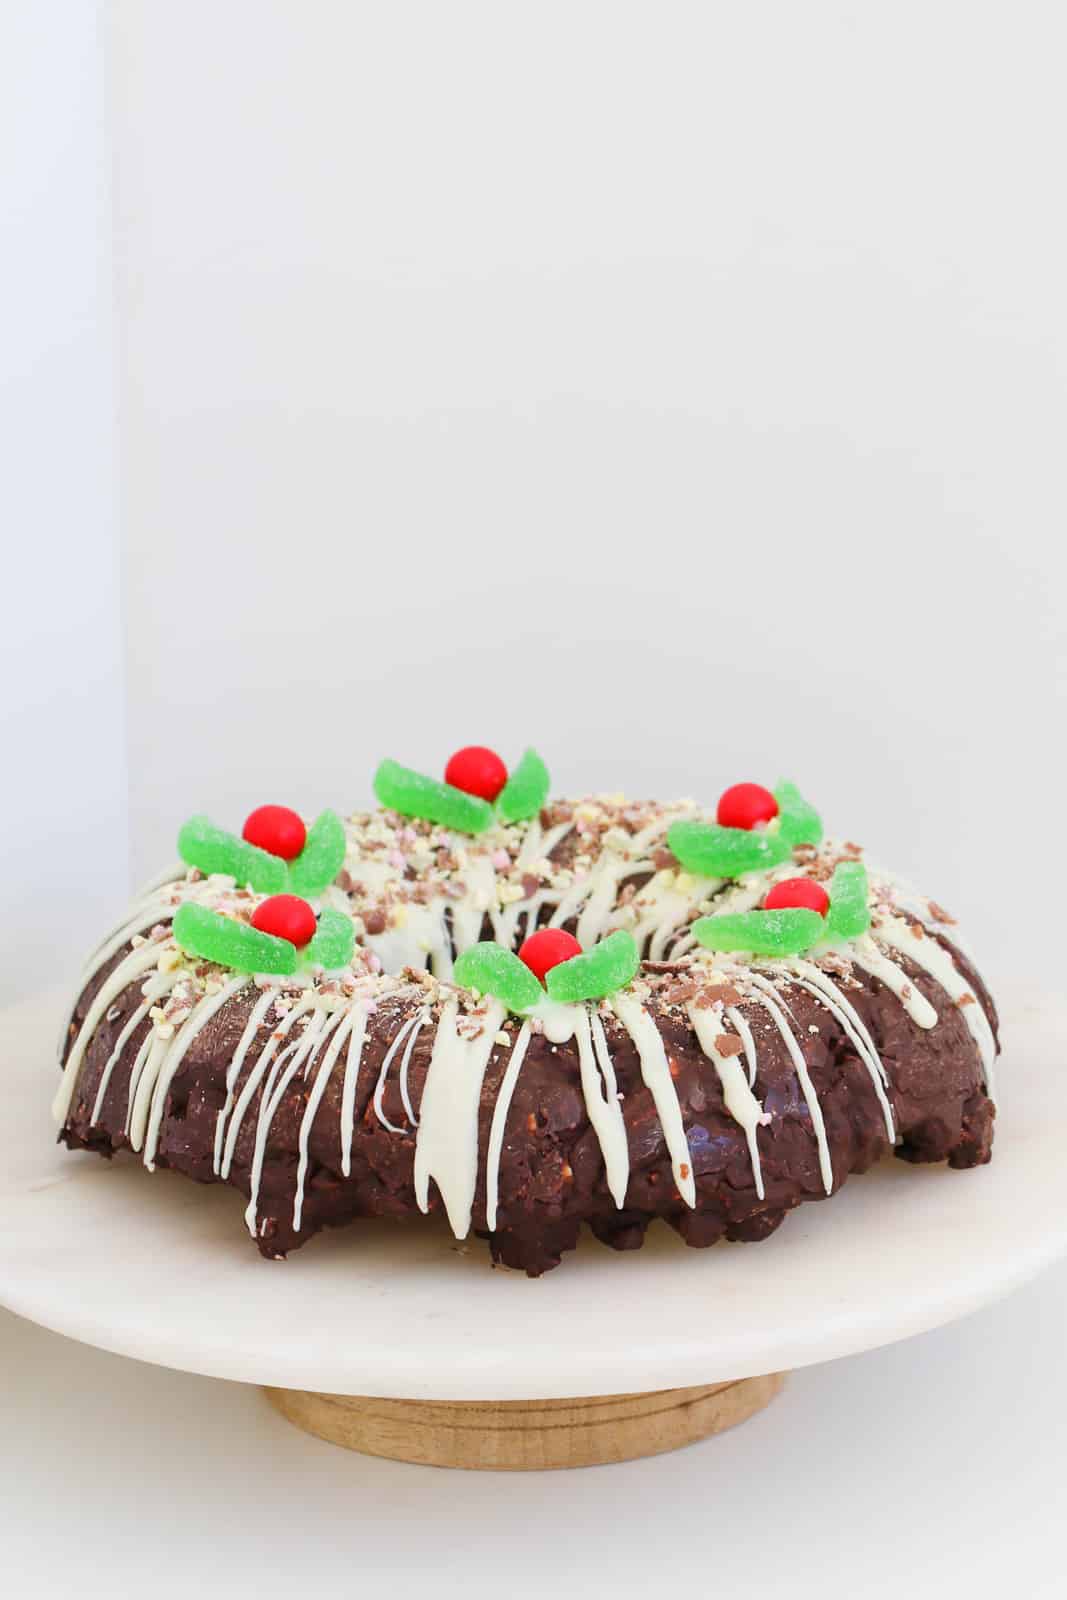 A Christmas themed rocky road chocolate wreath on a cake stand.